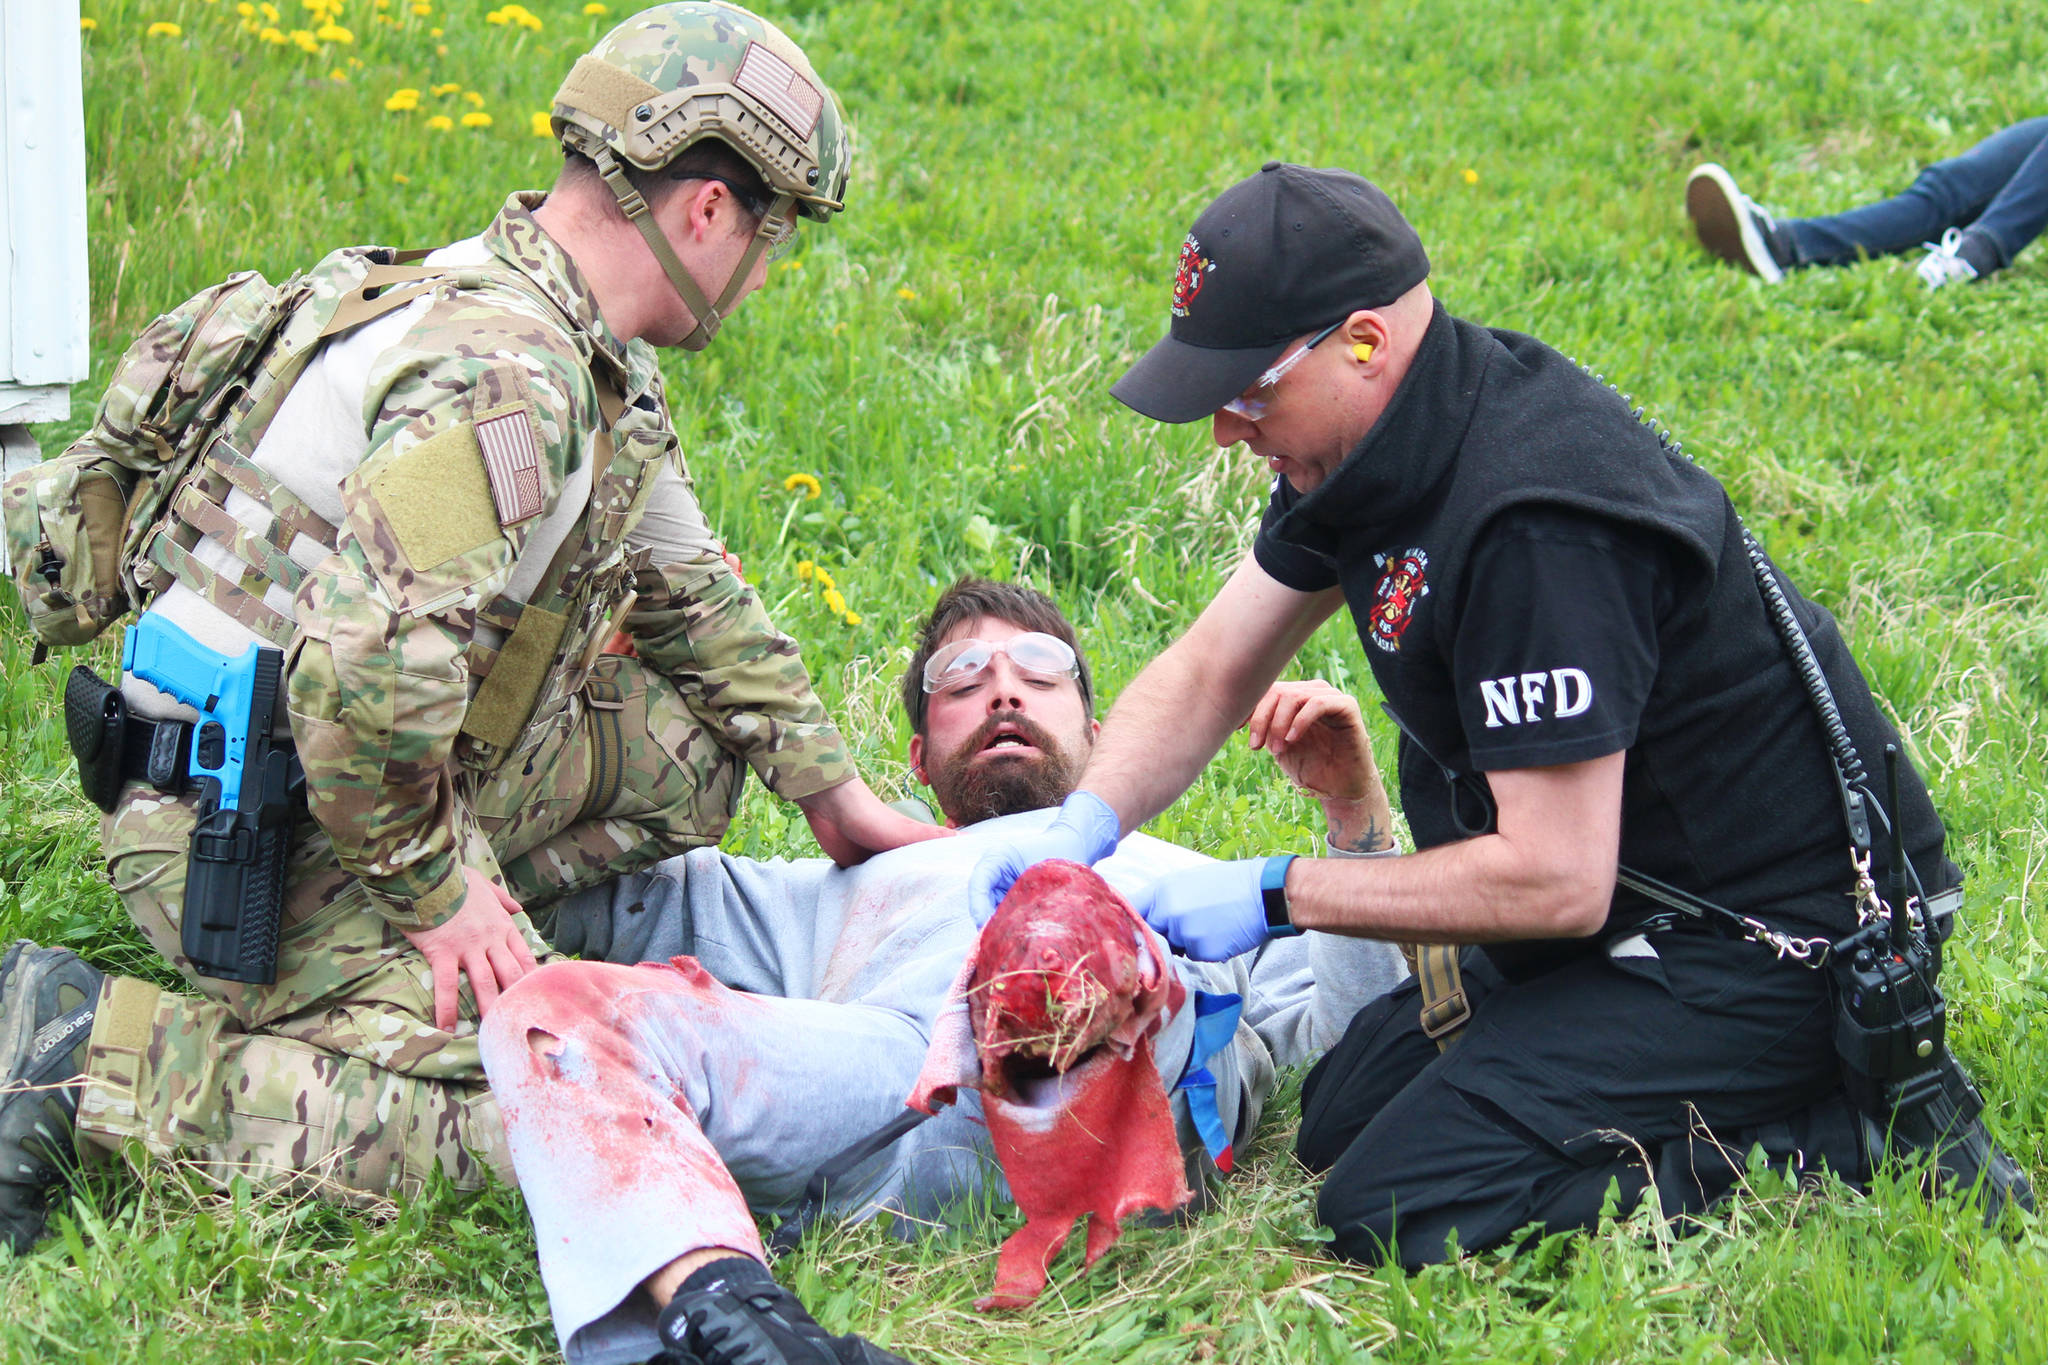 Arizona resident Nathan Lieber, a trauma amputee actor, looks at his own fake injuries casued by a simulated meth lab explosion while two local law enforement and emergency medical services personnel tend to him during a training drill Saturday, May 20, 2017 at the North Peninsula Recreation Center in Nikiski, Alaska. Lieber works for JTM Training Group, based out of Las Vegas, which travels to Alaska every year to conduct several multi-day training courses for members of law enforcement, corrections and medical first responders to practice working together in emergencies that turn violent. (Megan Pacer/Peninsula Clarion)